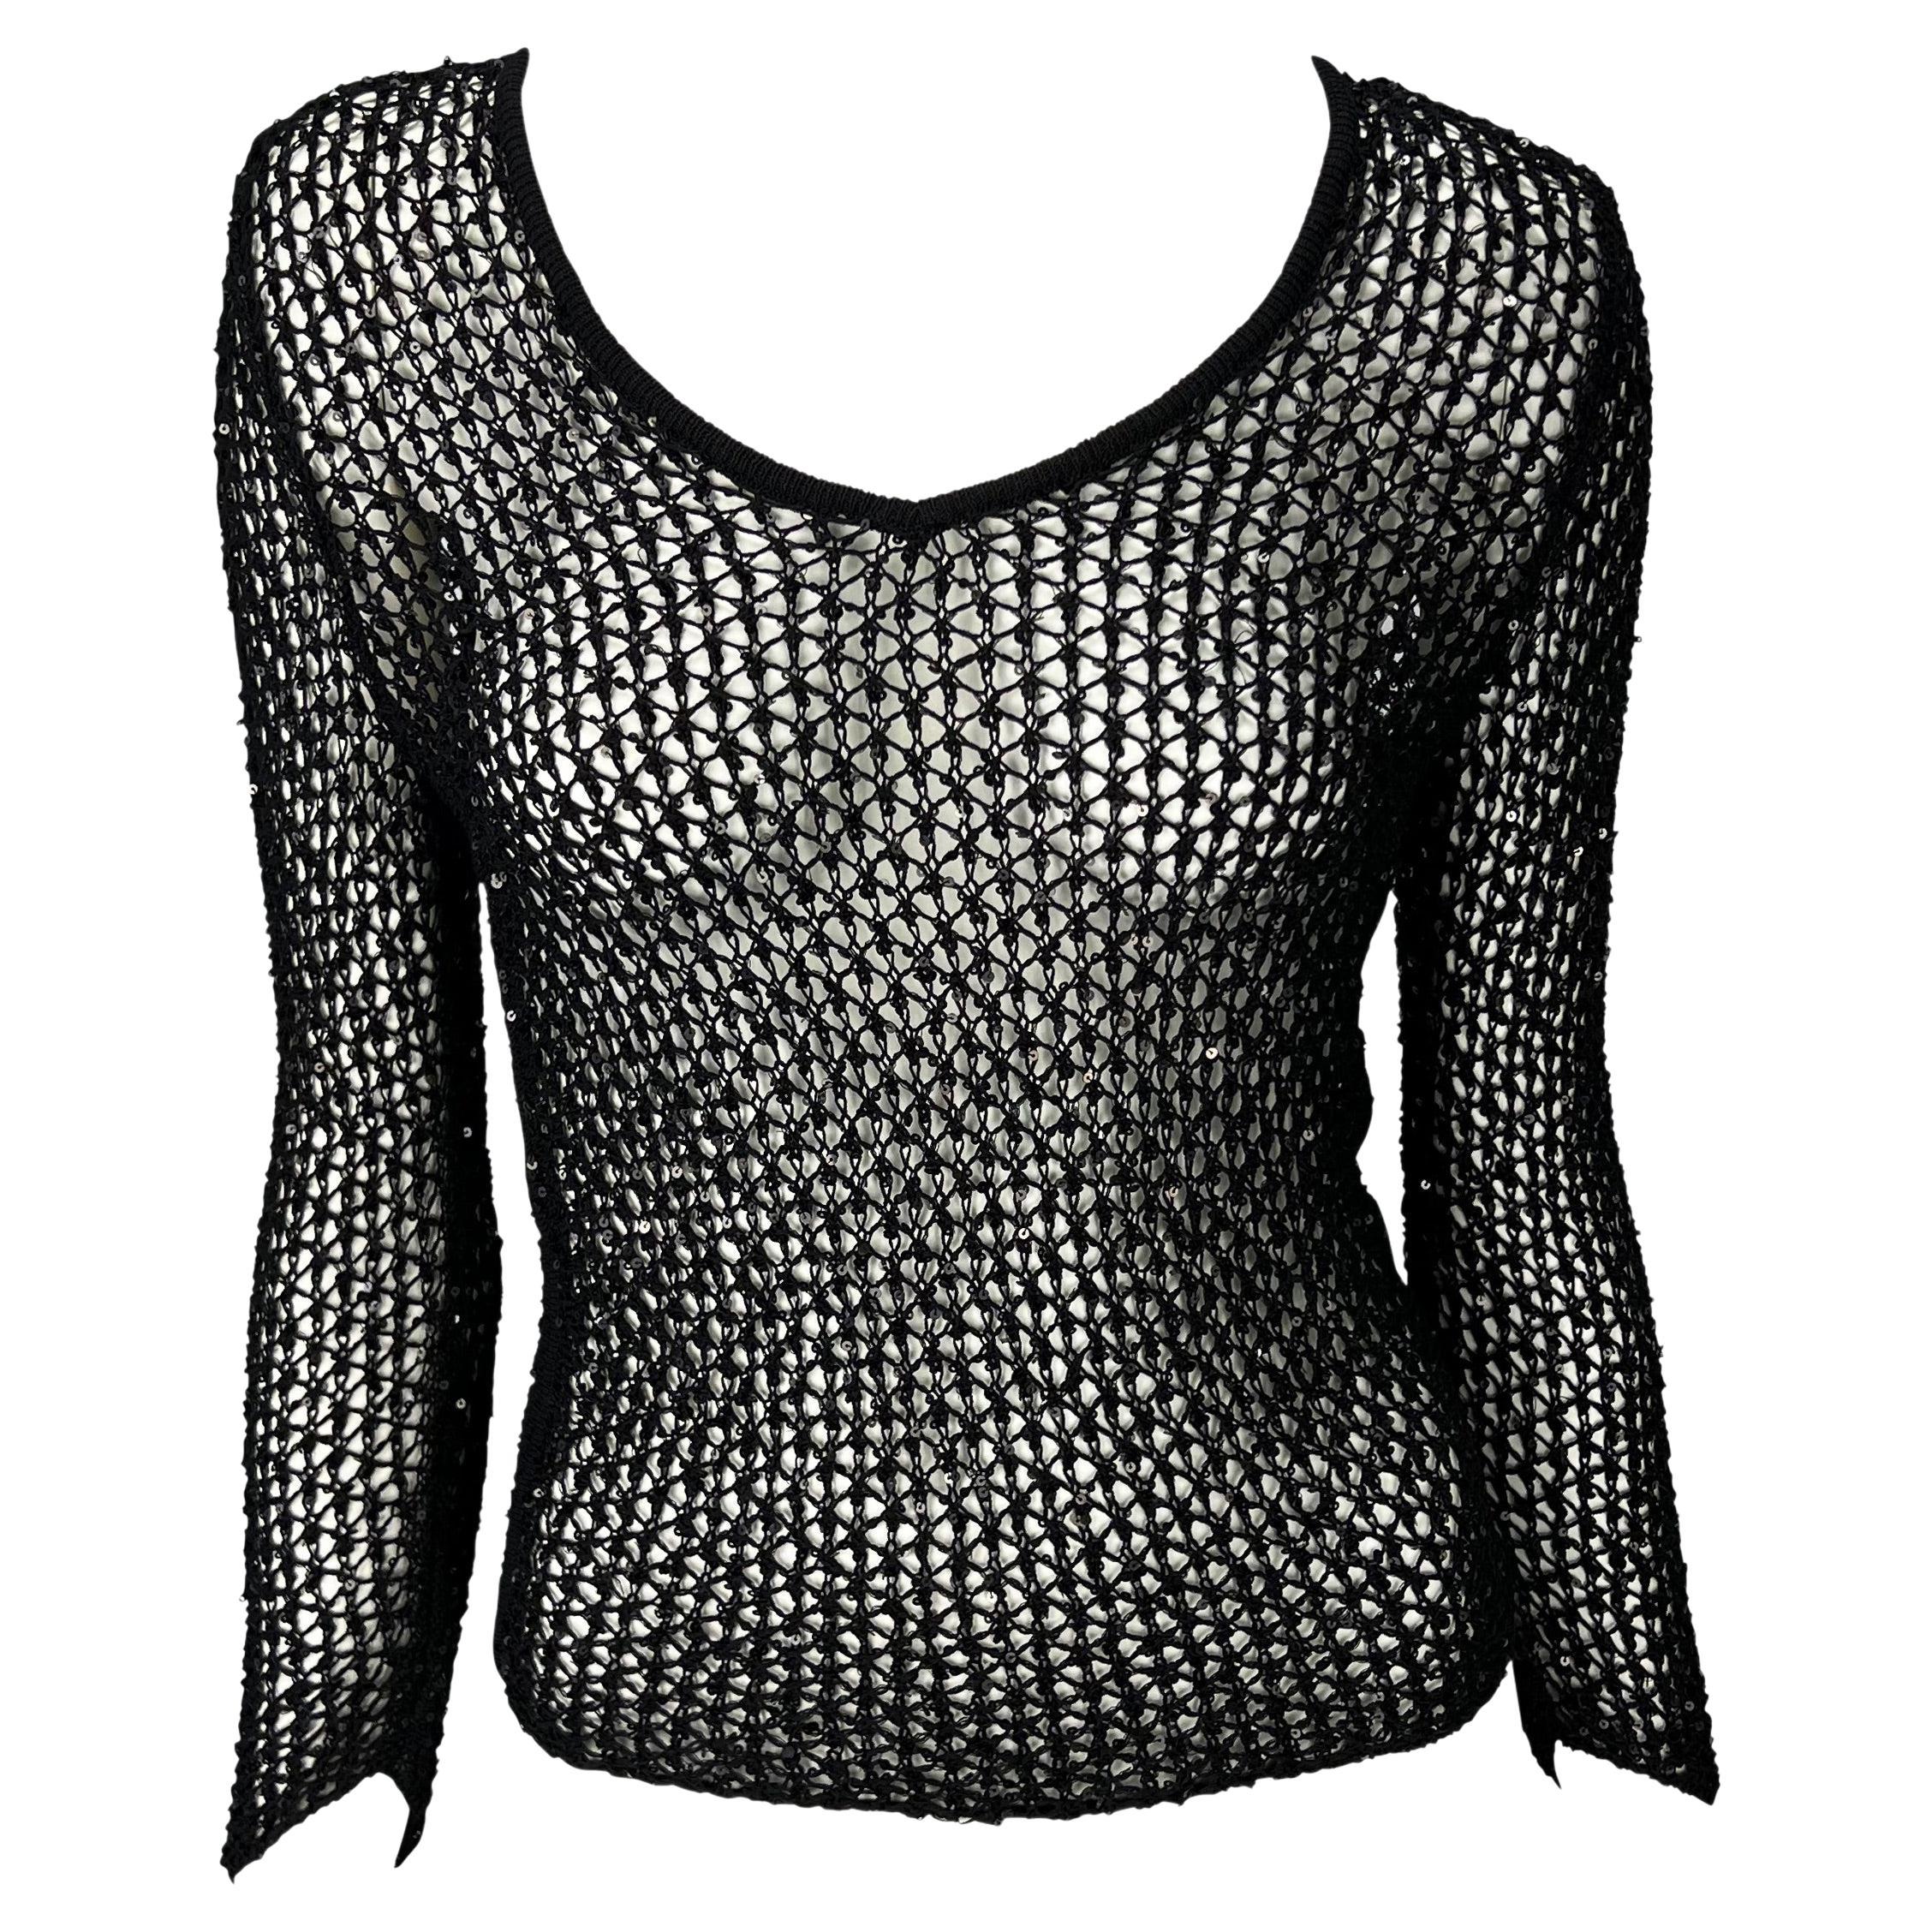 Late 1990s Gianni Versace by Donatella Sequin Fishnet Stretch Knit Sweater Top